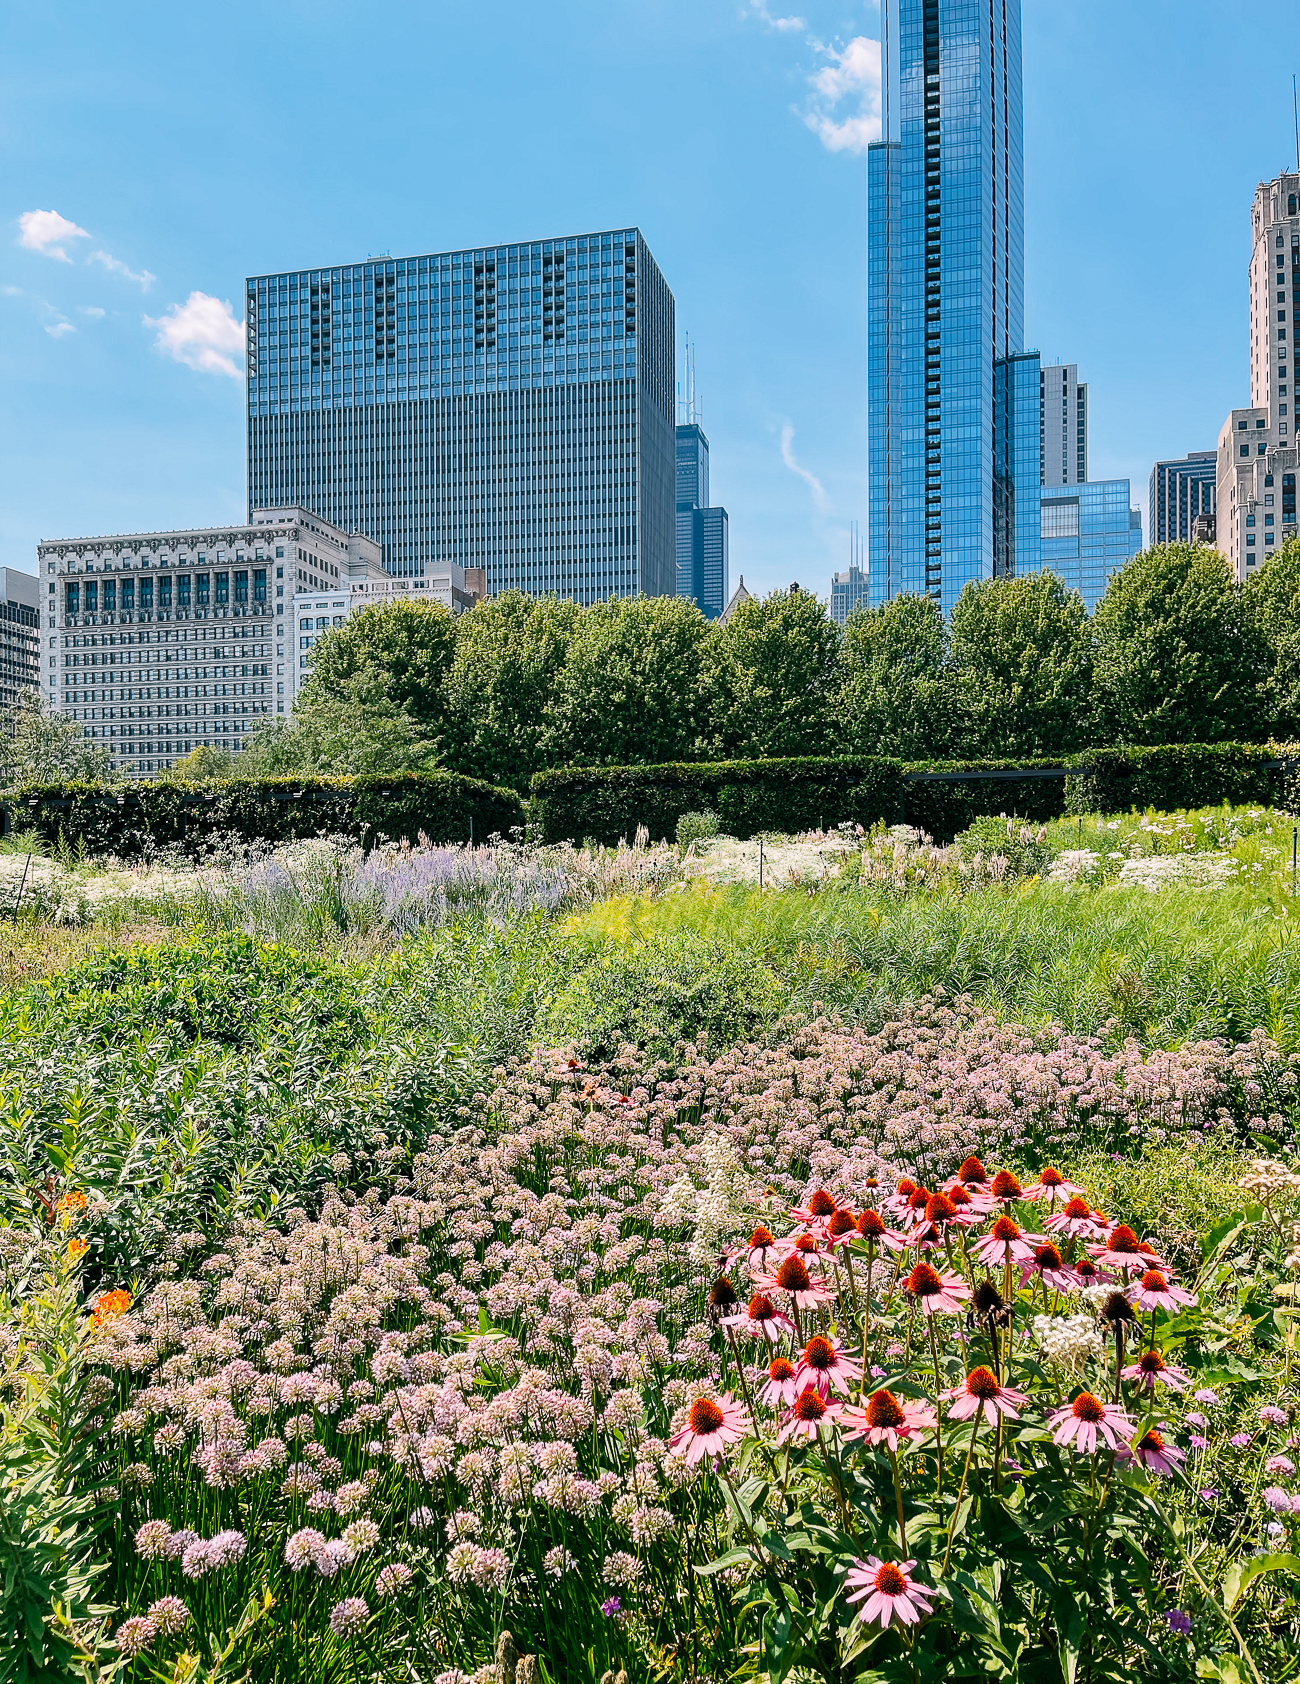 Flowers in bloom at Lurie Garden in Chicago